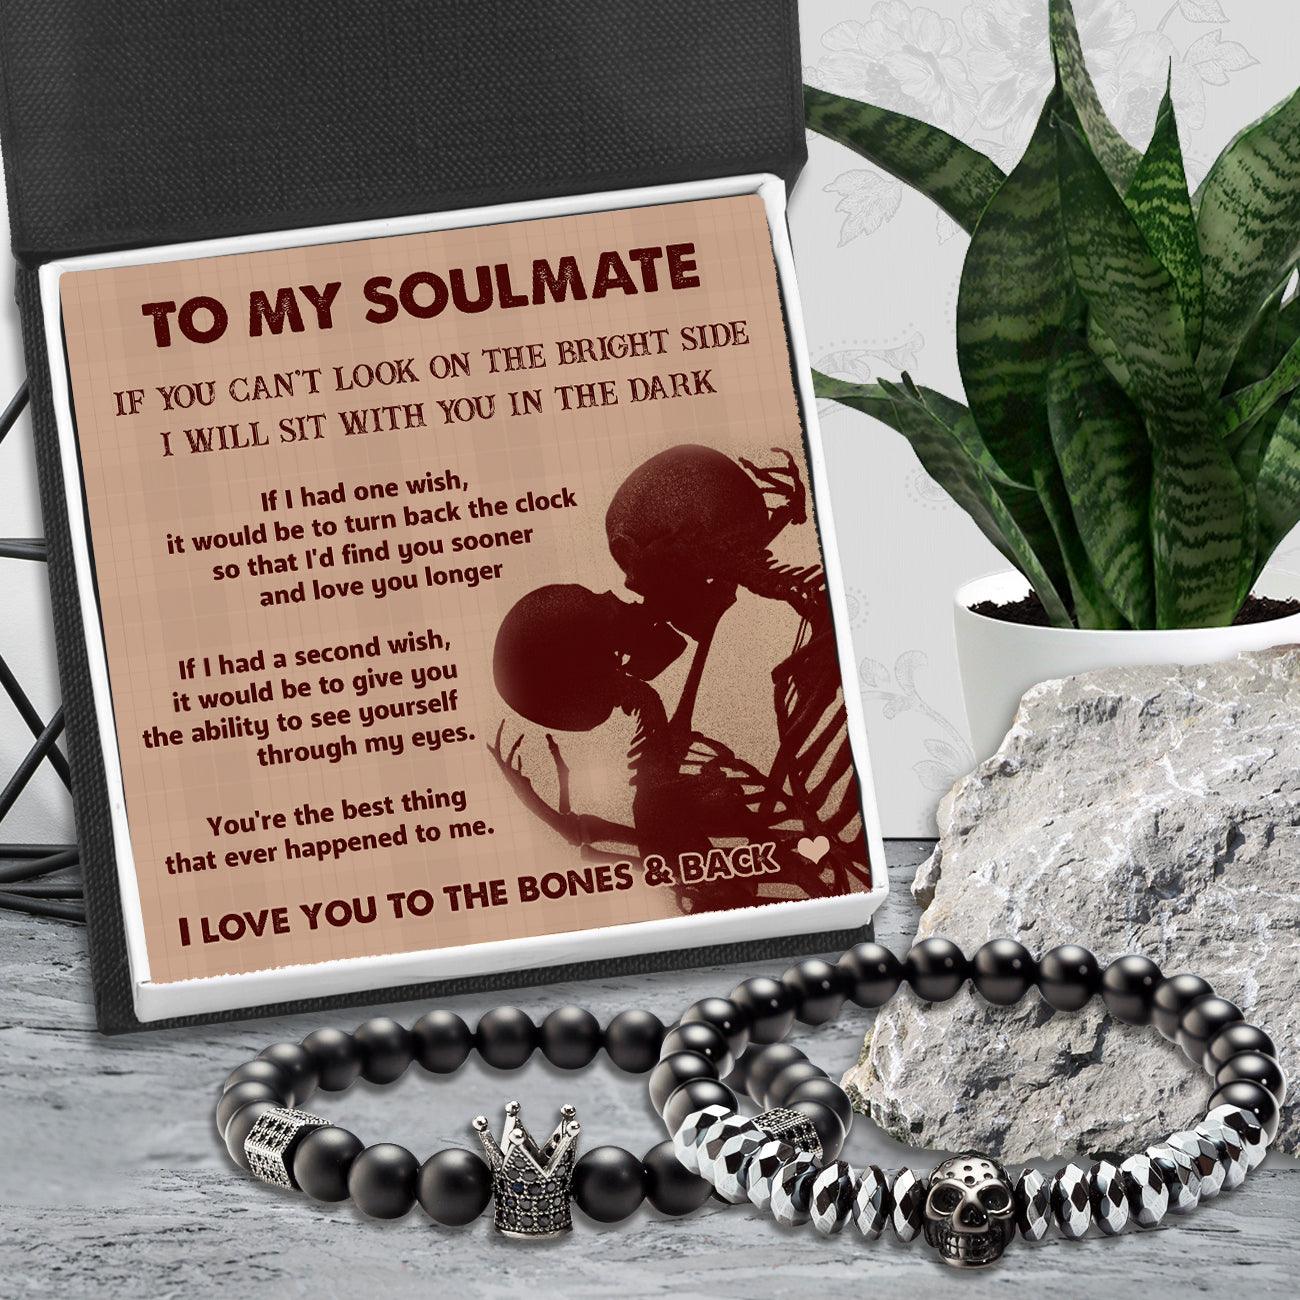 Couple Crown and Skull Bracelets - Skull - To My Soulmate - You're The Best Thing That Ever Happened To Me - Augbu13006 - Gifts Holder